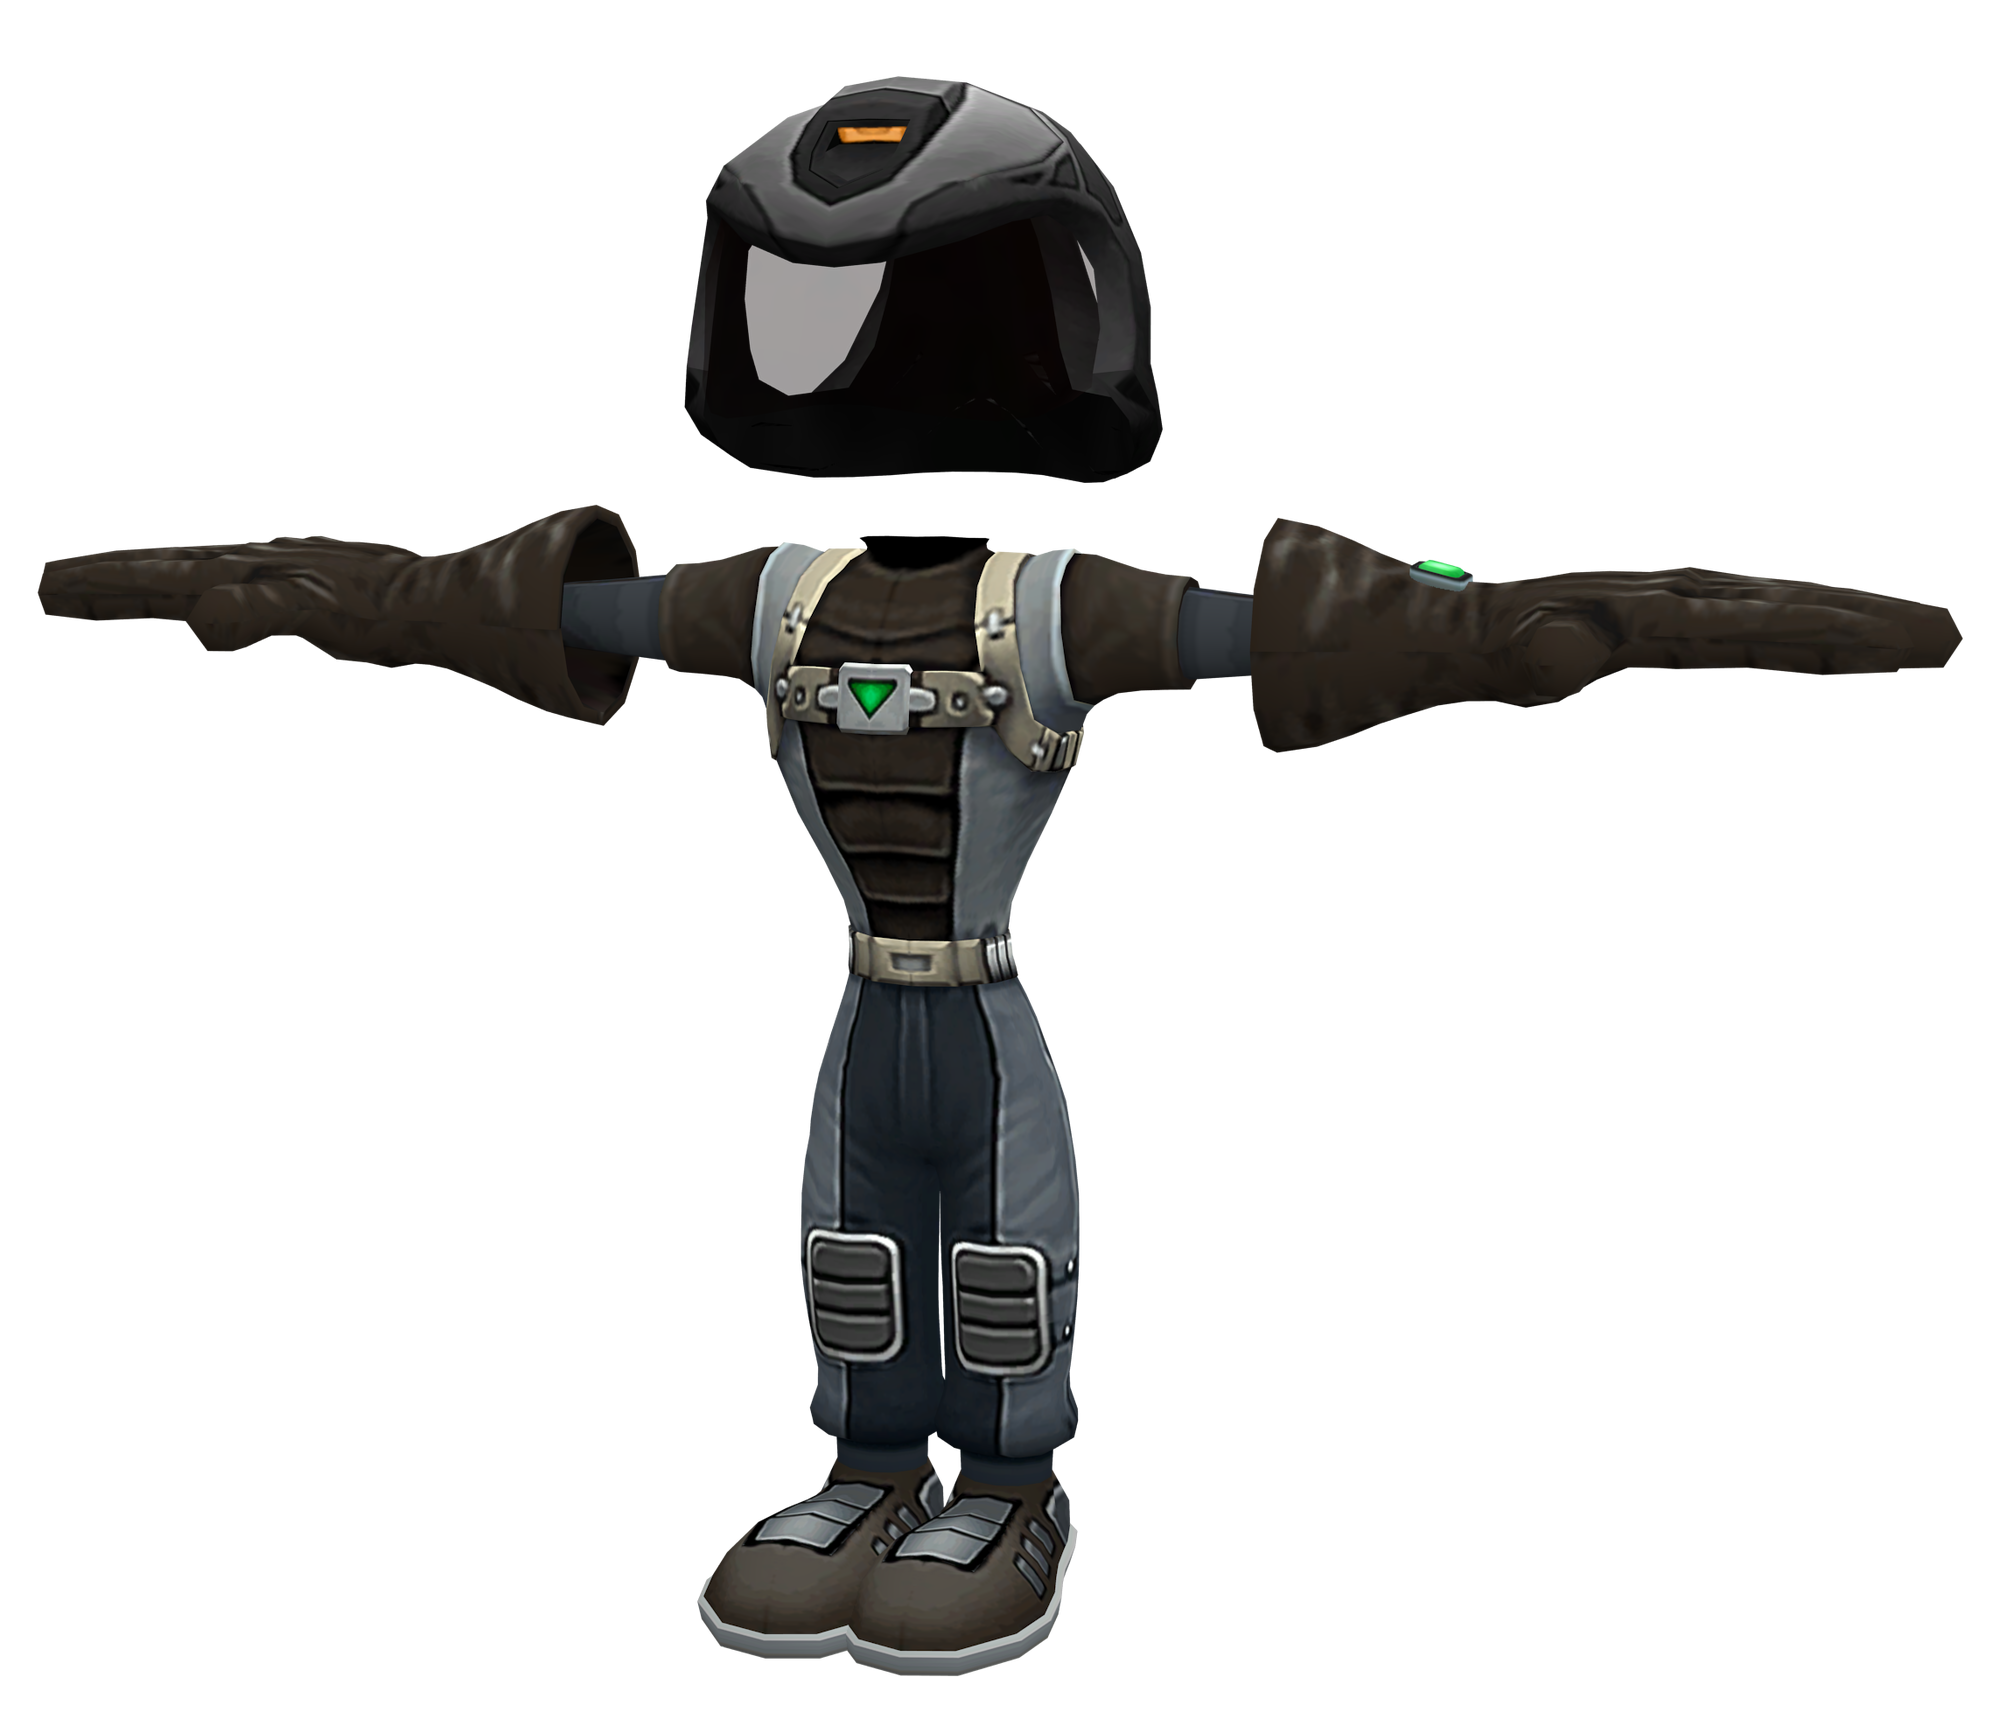 Up Your Arsenal armor | Ratchet & Clank Wiki | Fandom